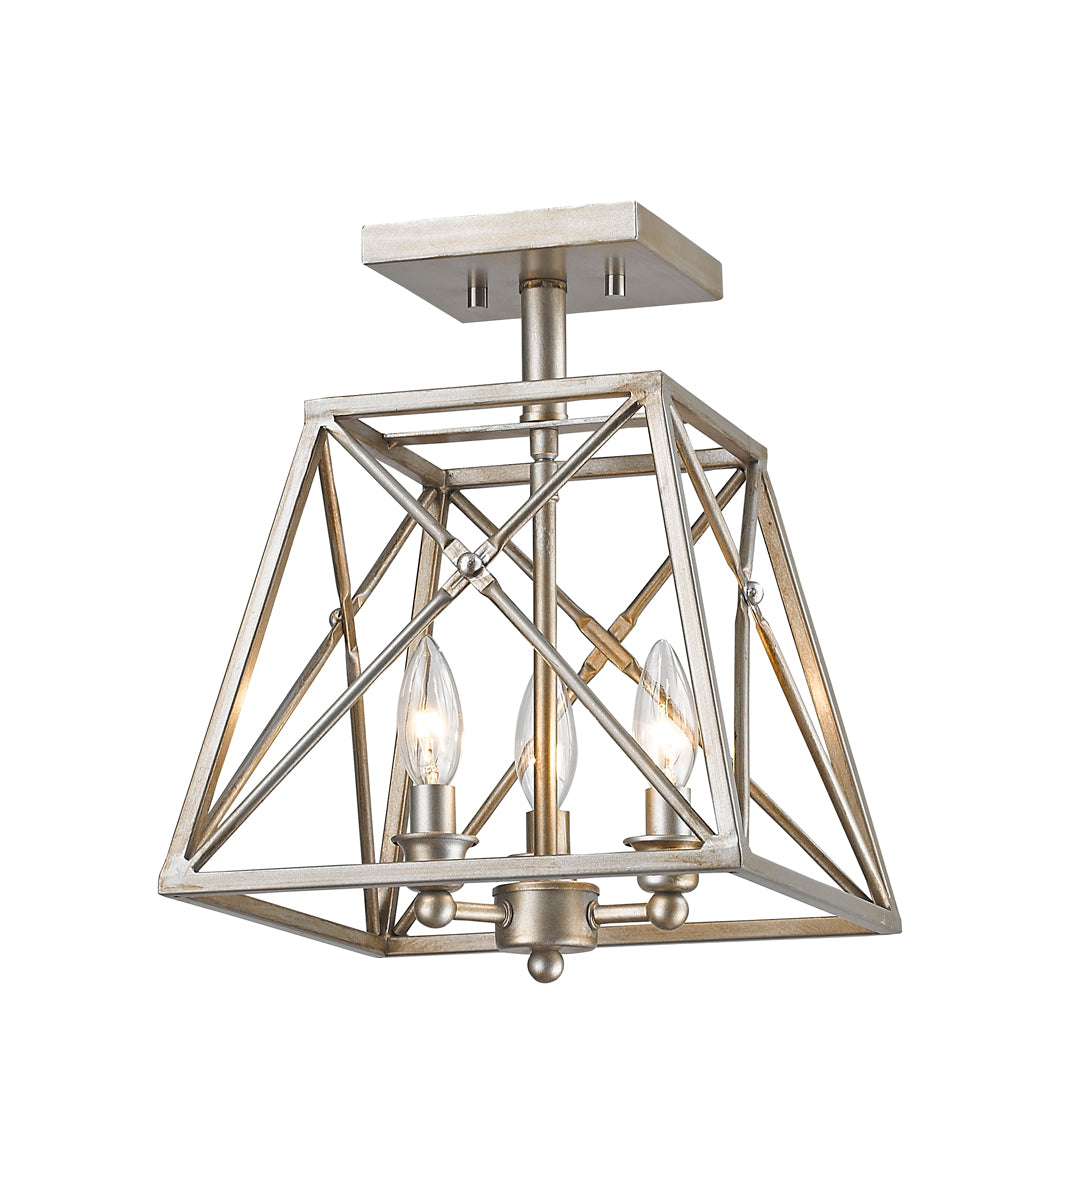 Tressle 3-Light Semi Flush Mount in Antique Silver with Antique Silver Shade - Lamps Expo